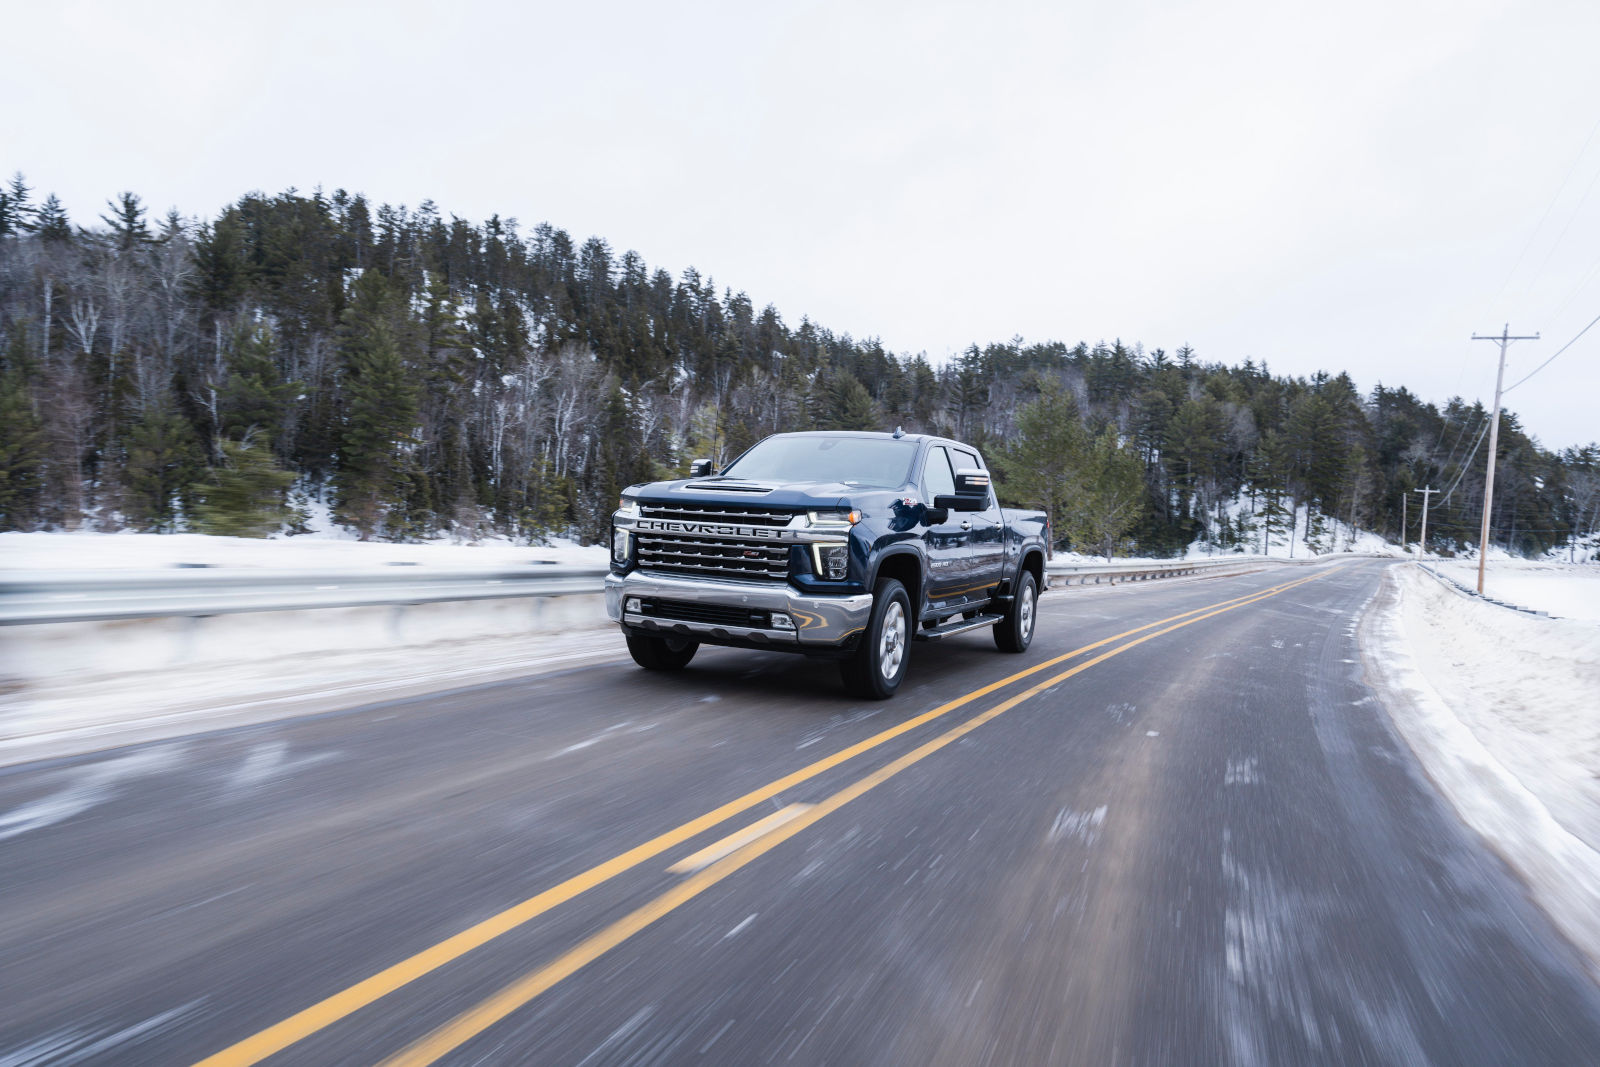 Essential Insights About Winter Tires for Your Chevrolet Vehicle